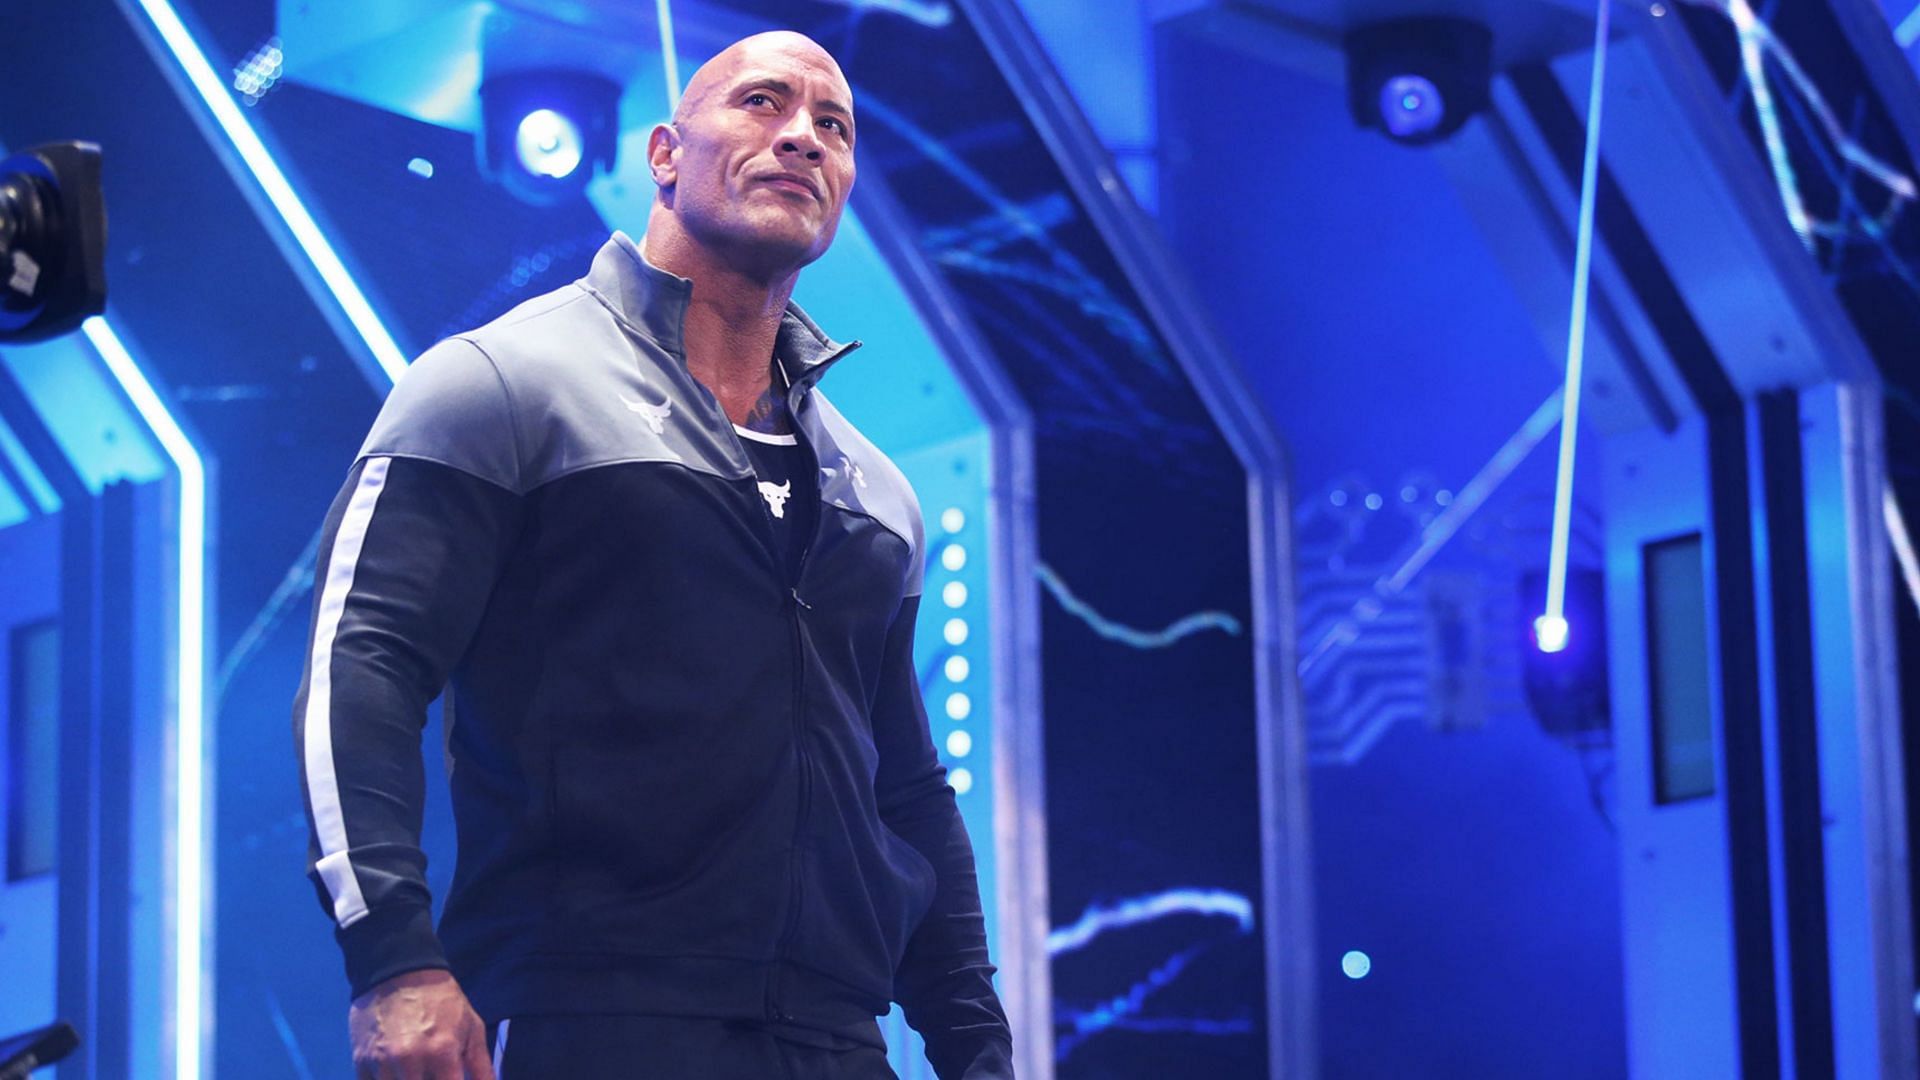 Will The Rock return to WWE for one more match?